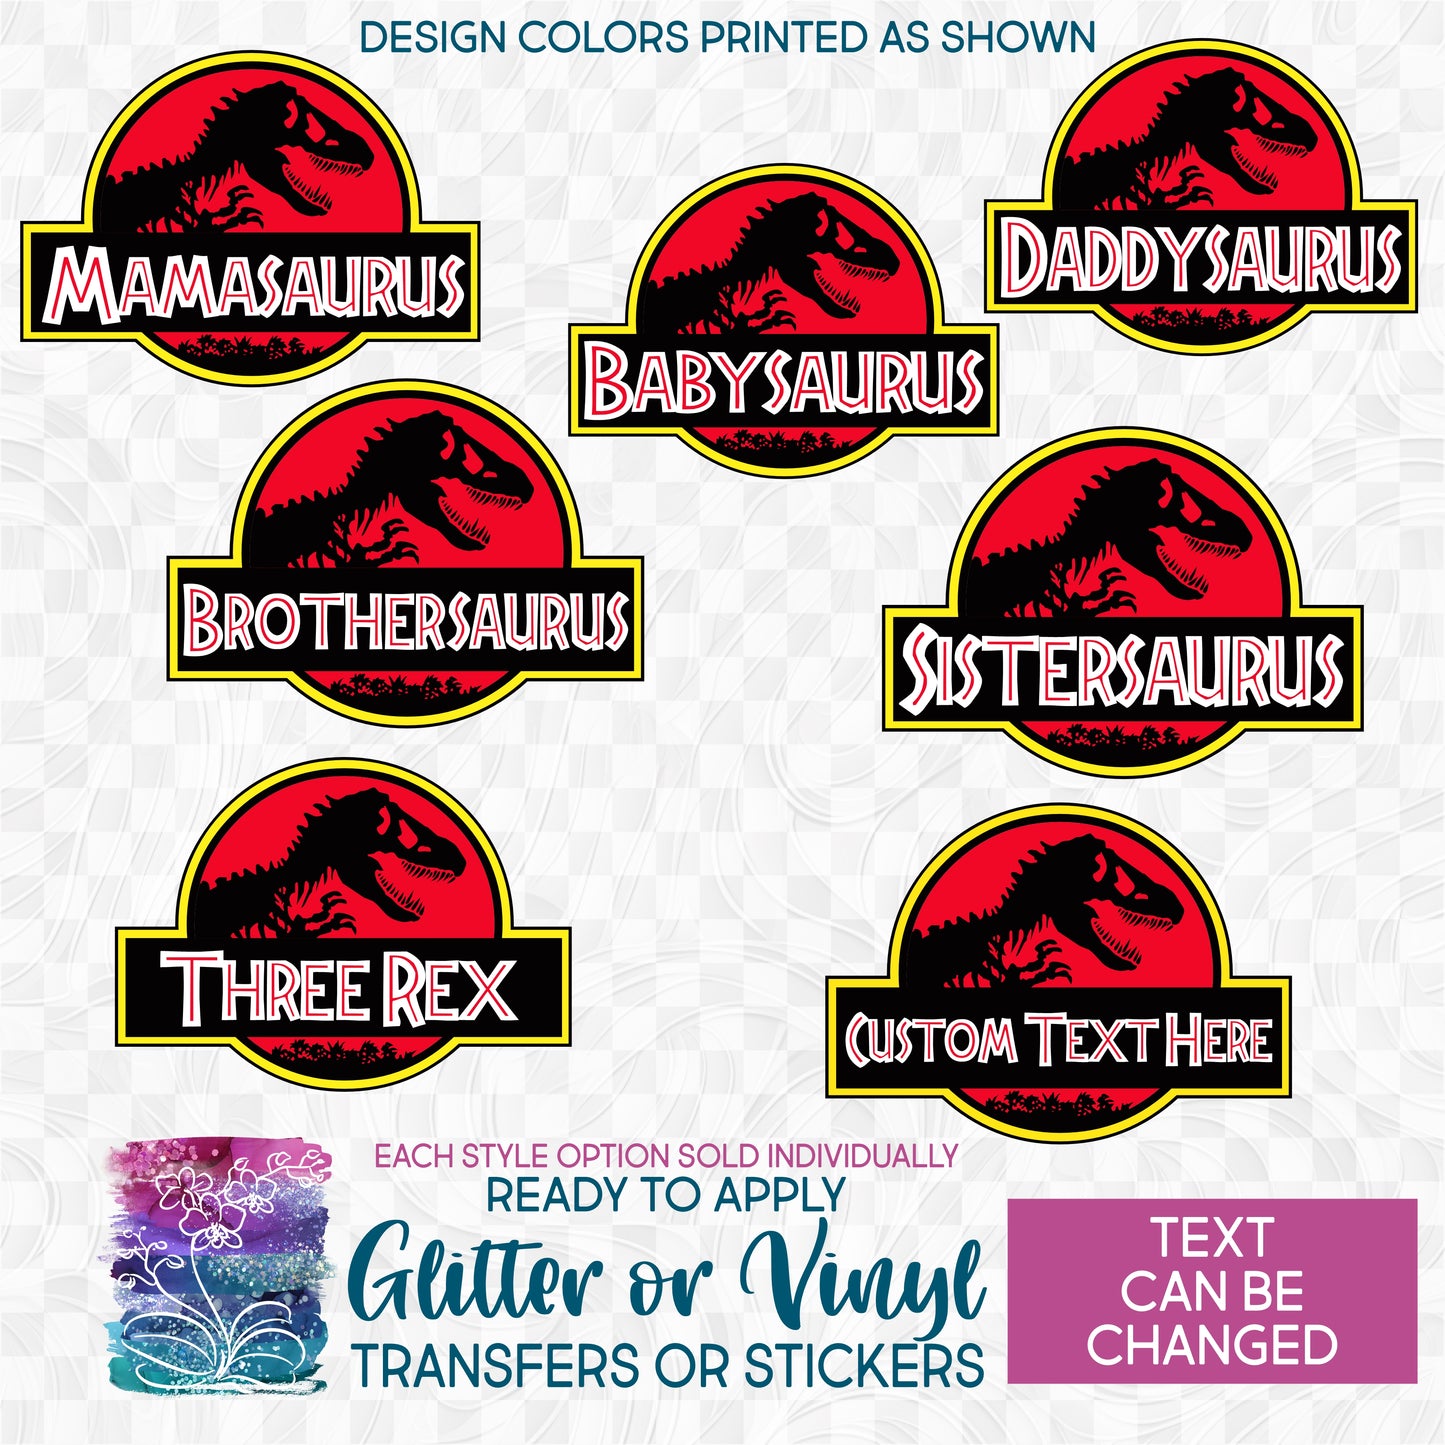 SBS-244-C11 Mommy Daddy Brother Baby Sister Saurus Family Dinosaur Made-to-Order Iron-On Transfer or Sticker